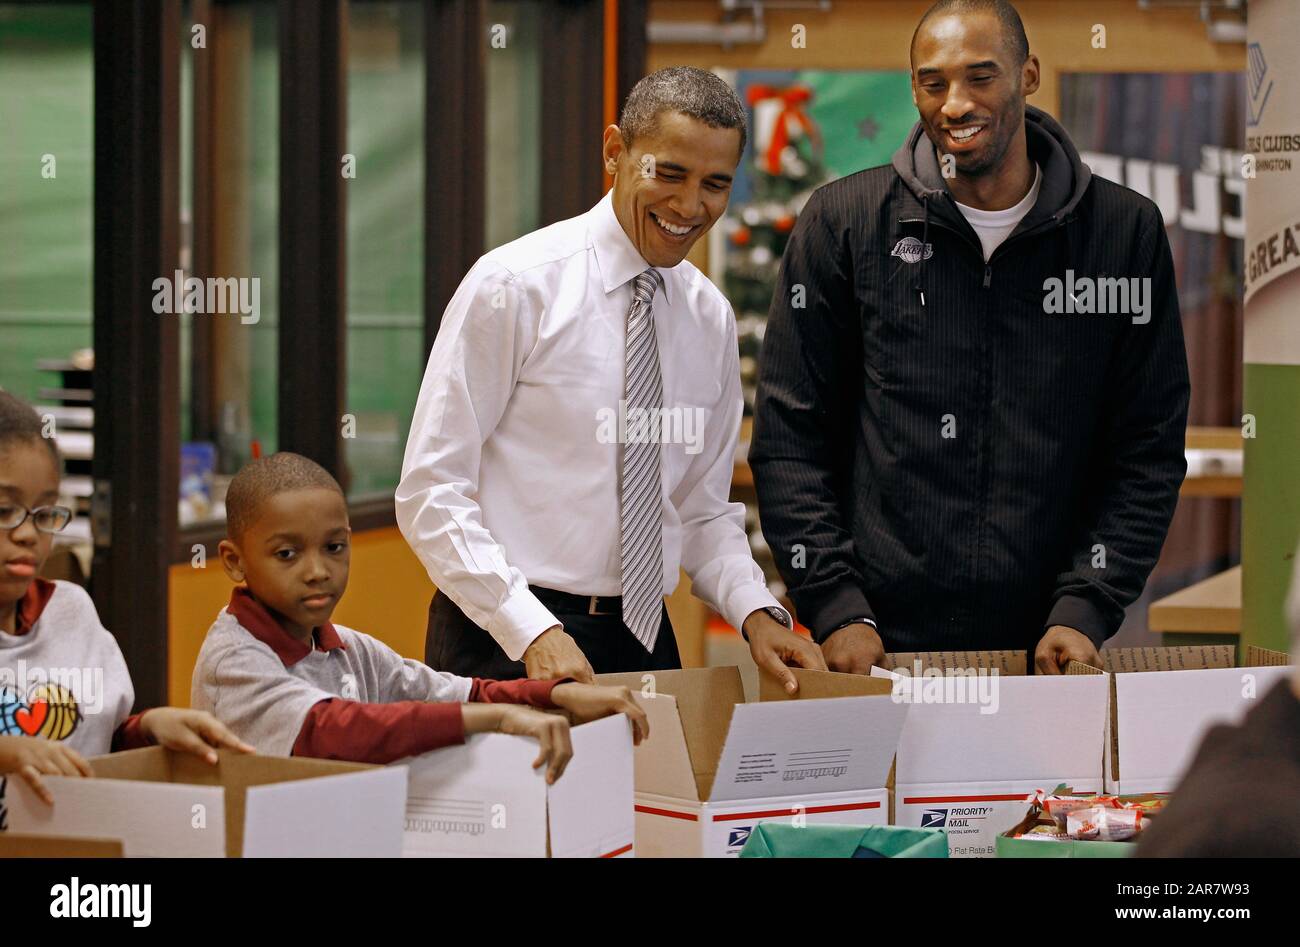 Washington, DC. 13th Dec, 2010. United States President Barack Obama (C) and Los Angeles Lakers guard Kobe Bryant help children volunteers fill care packages during a NBA Cares service event at the Boys and Girls Club at THEARC, December 13, 2010 in Washington, DC. Bryant and all the members of the 2010 NBA Championship Lakers team volunteered on projects at the club before being honored by the president for their victory. Credit: Chip Somodevilla - Pool via CNP | usage worldwide Credit: dpa/Alamy Live News Stock Photo